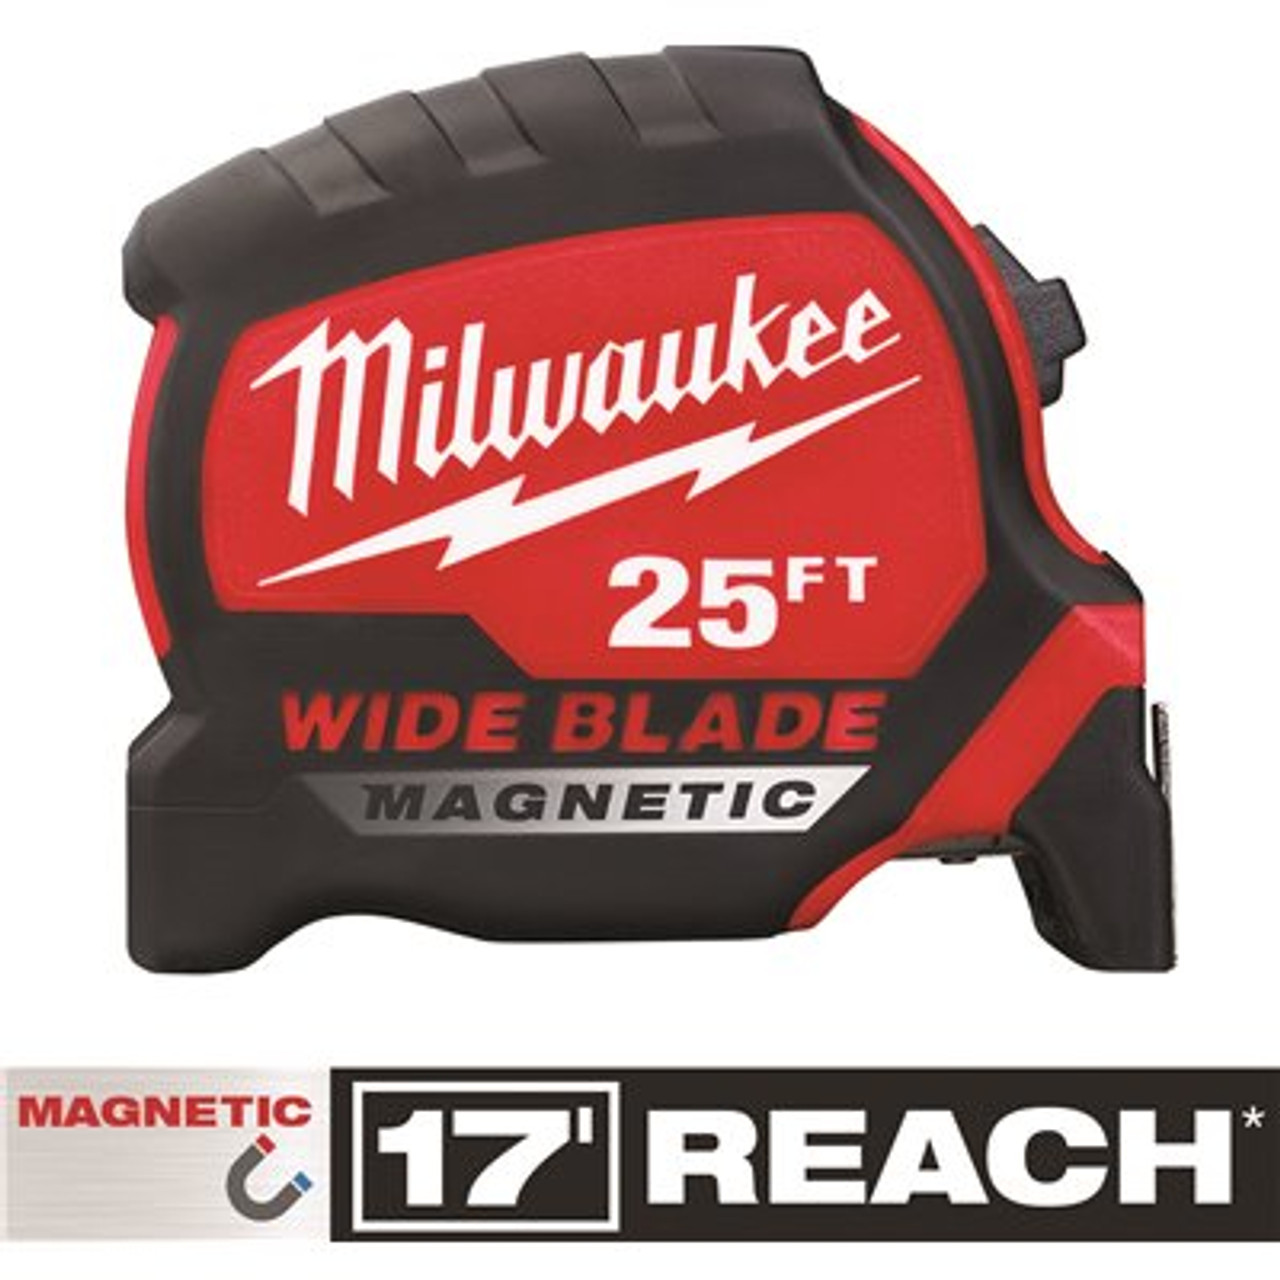 Milwaukee 25 ft. x 1-5/16 in. Wide Blade Magnetic Tape Measure with 17 ft. Reach